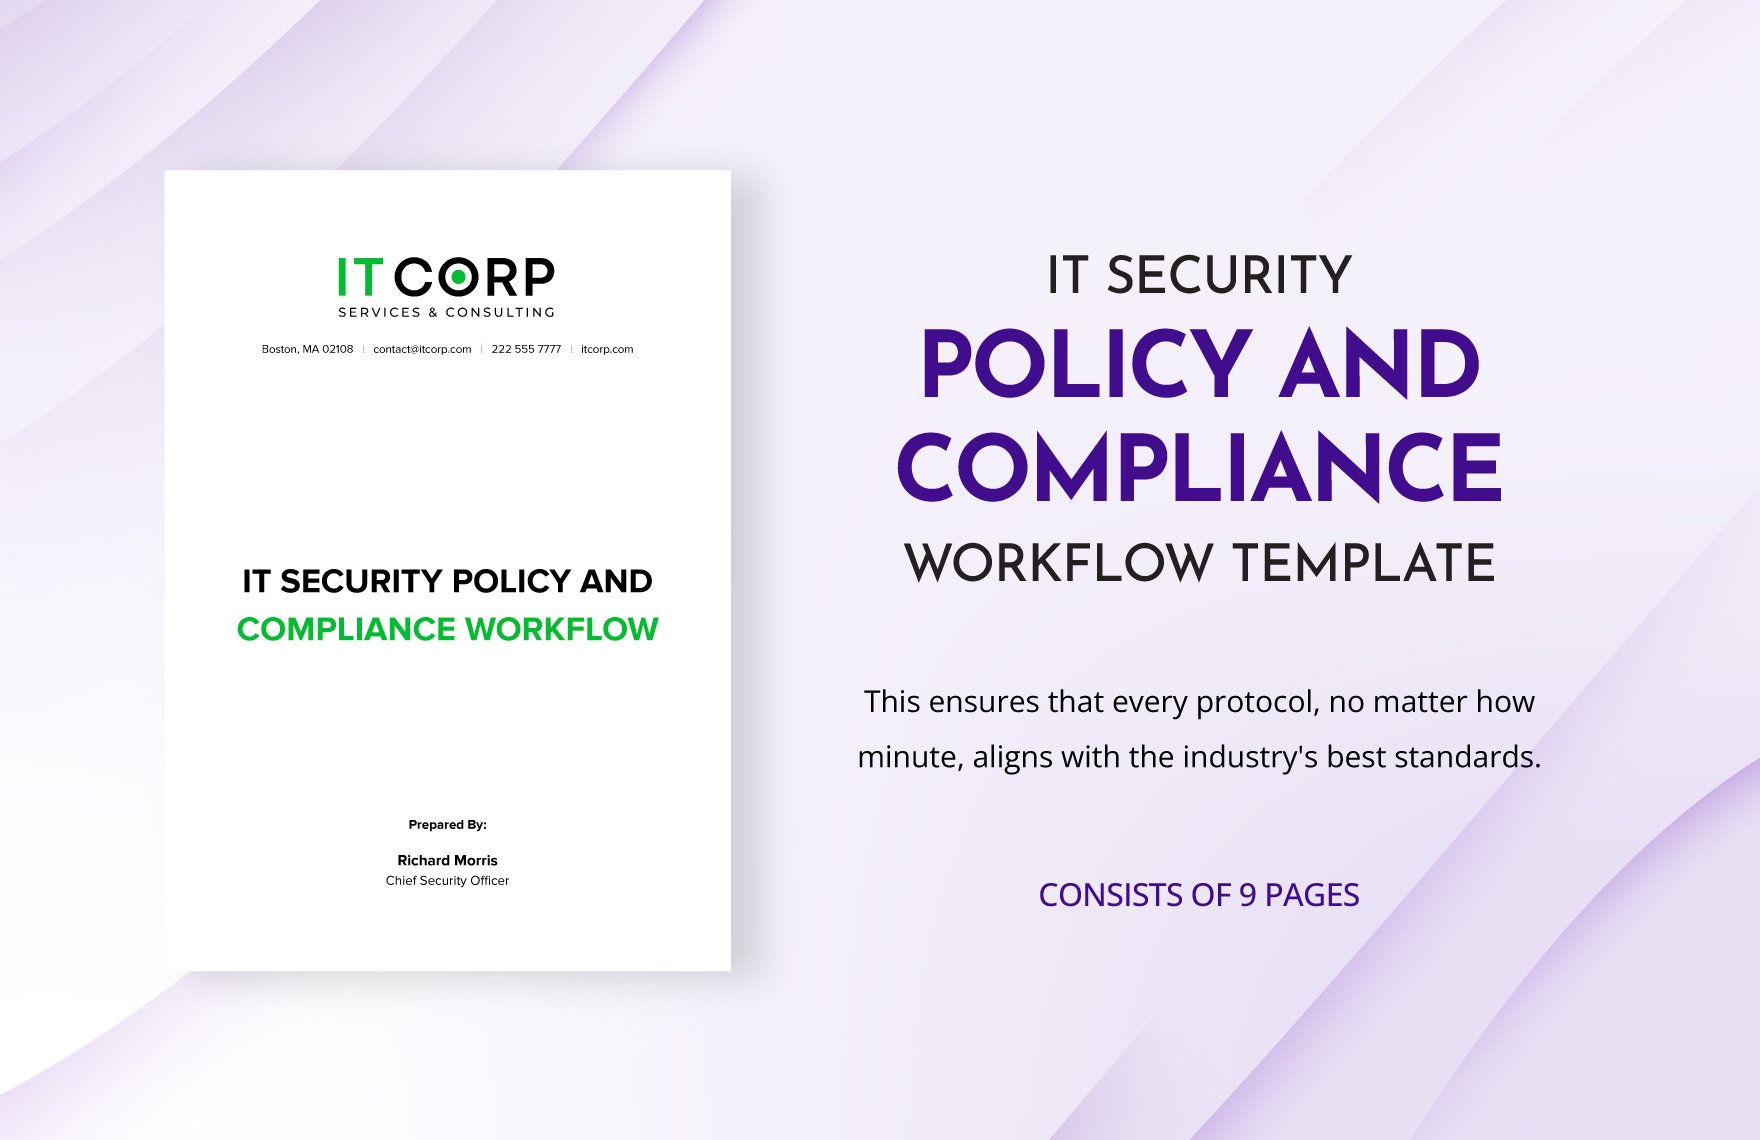 IT Security Policy & Compliance Workflow Template